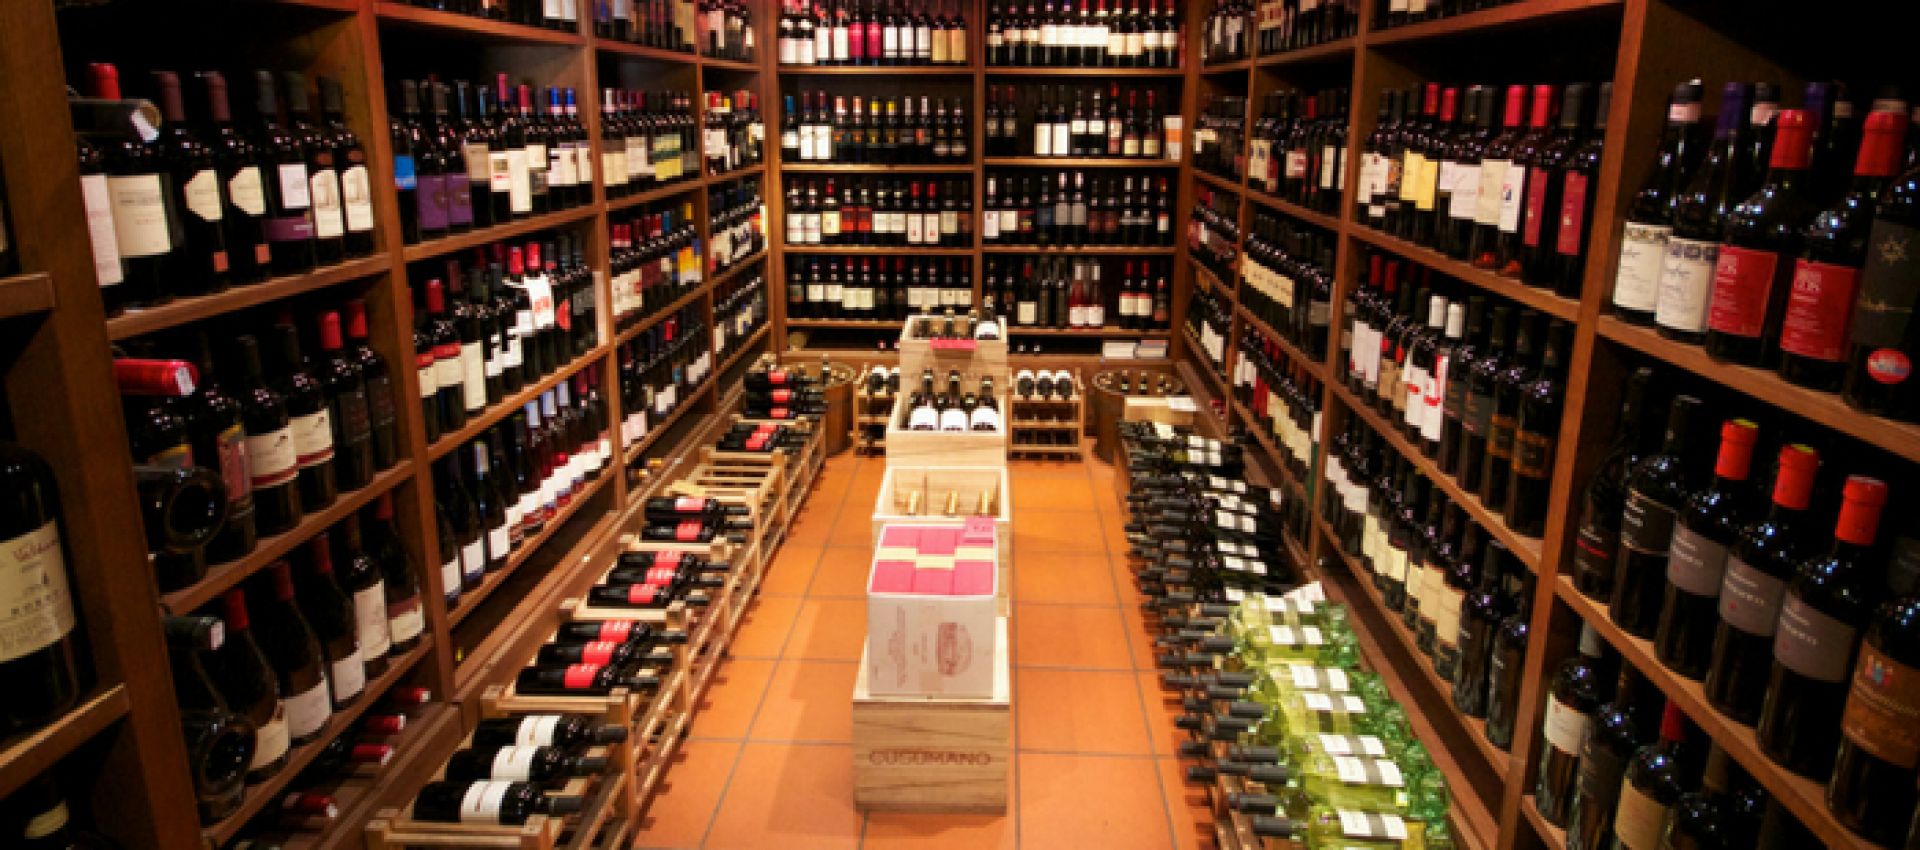 Photo for: The Bottle Shop Buyer's Checklist